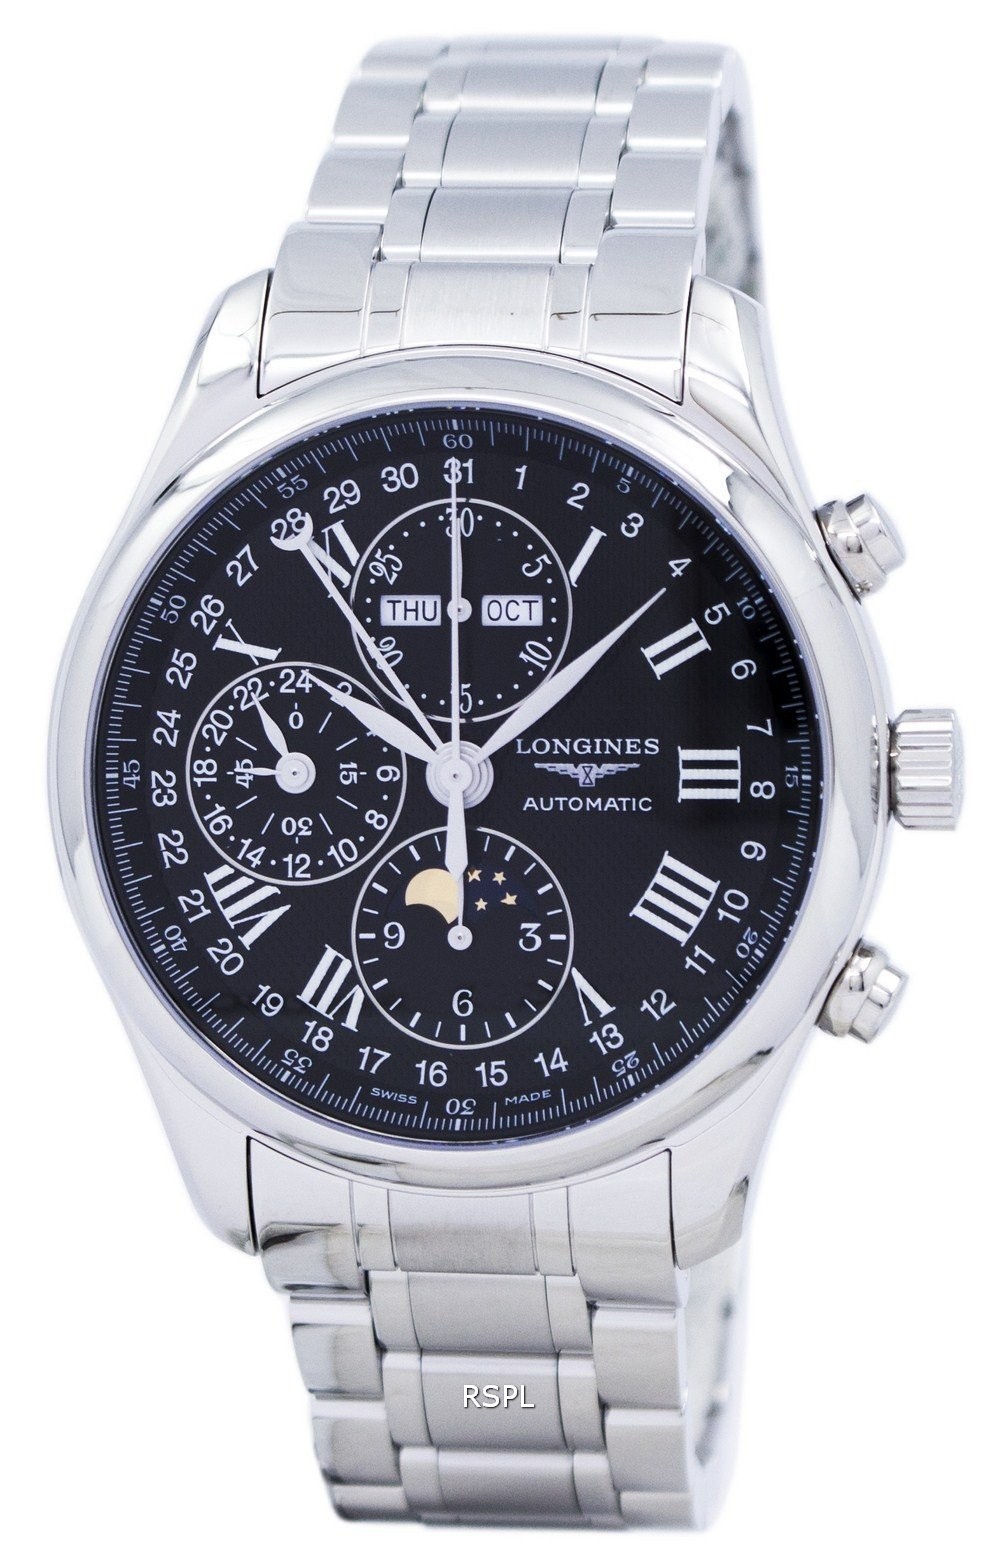 Longines Master Collection Moon Phase Chronograph Automatic L2.773.4.51.6 Men’s Watch.jpg  by zetawatches